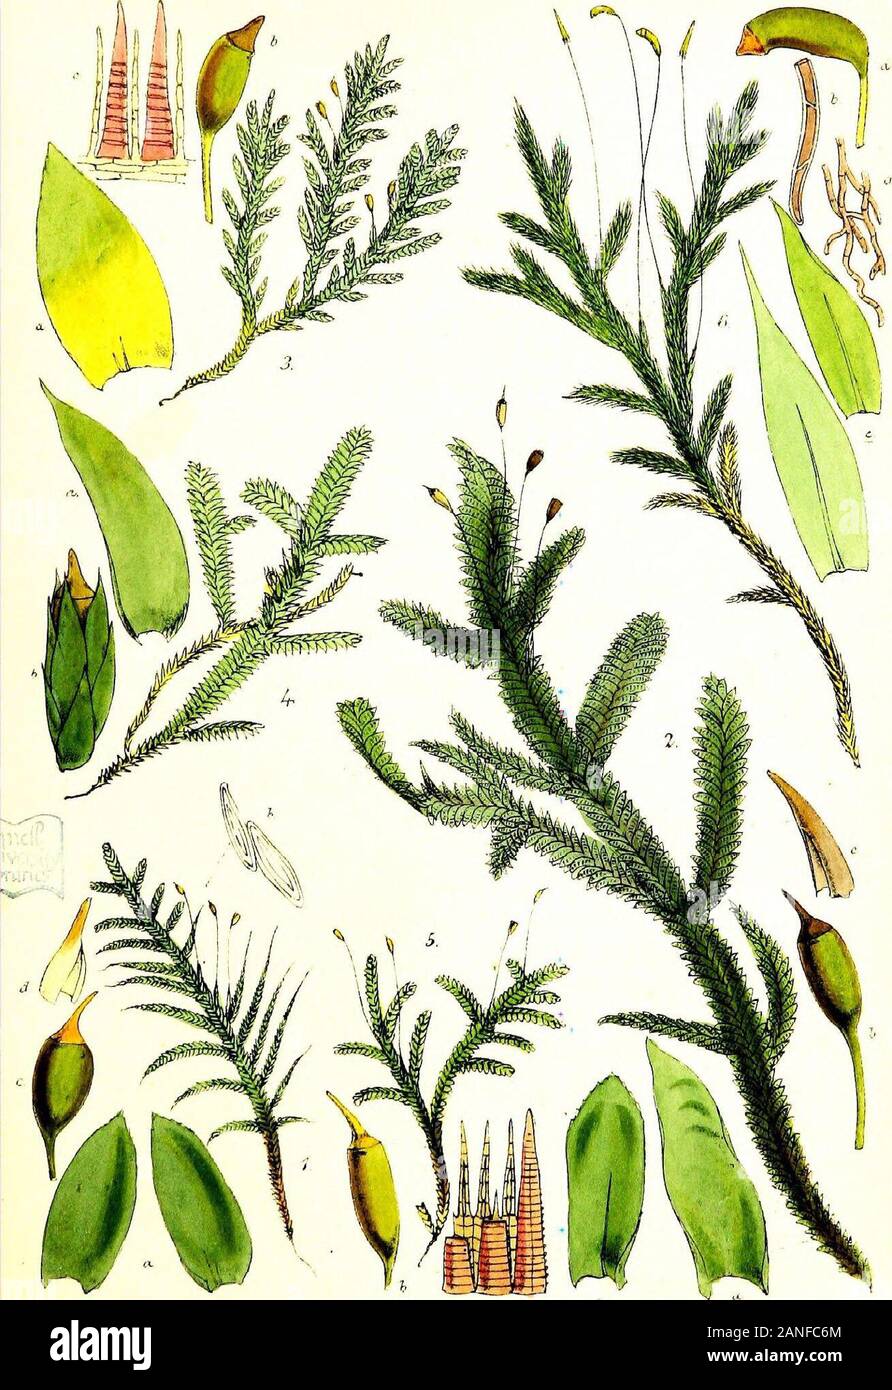 Handbook of British mosses; comprising all that are known to be natives of the British Isles . ^itfift.ila.ec -itTi ViTvcent Eroo^ks Inn PLATE IV. 1. Neckefa complanata, a. leaves, magnified. b. leaf-cells, magnified. c. sporangium, magnified. d. veil, magnified. 2. N. crispa. a. leaf, magnified. b. sporangium, magnified. c. veil, magnified. 3. N. pumila. a. leaf magnified. b. sporangium magnified. c. part of peristome, magnified, seen from within. 4. N. pennata. a. leaf, magnified. b. sporangium, magnified, with perichaetium. 5. Homalia trichomanoides. a. leaf, magnified. b. sporangium, magni Stock Photo